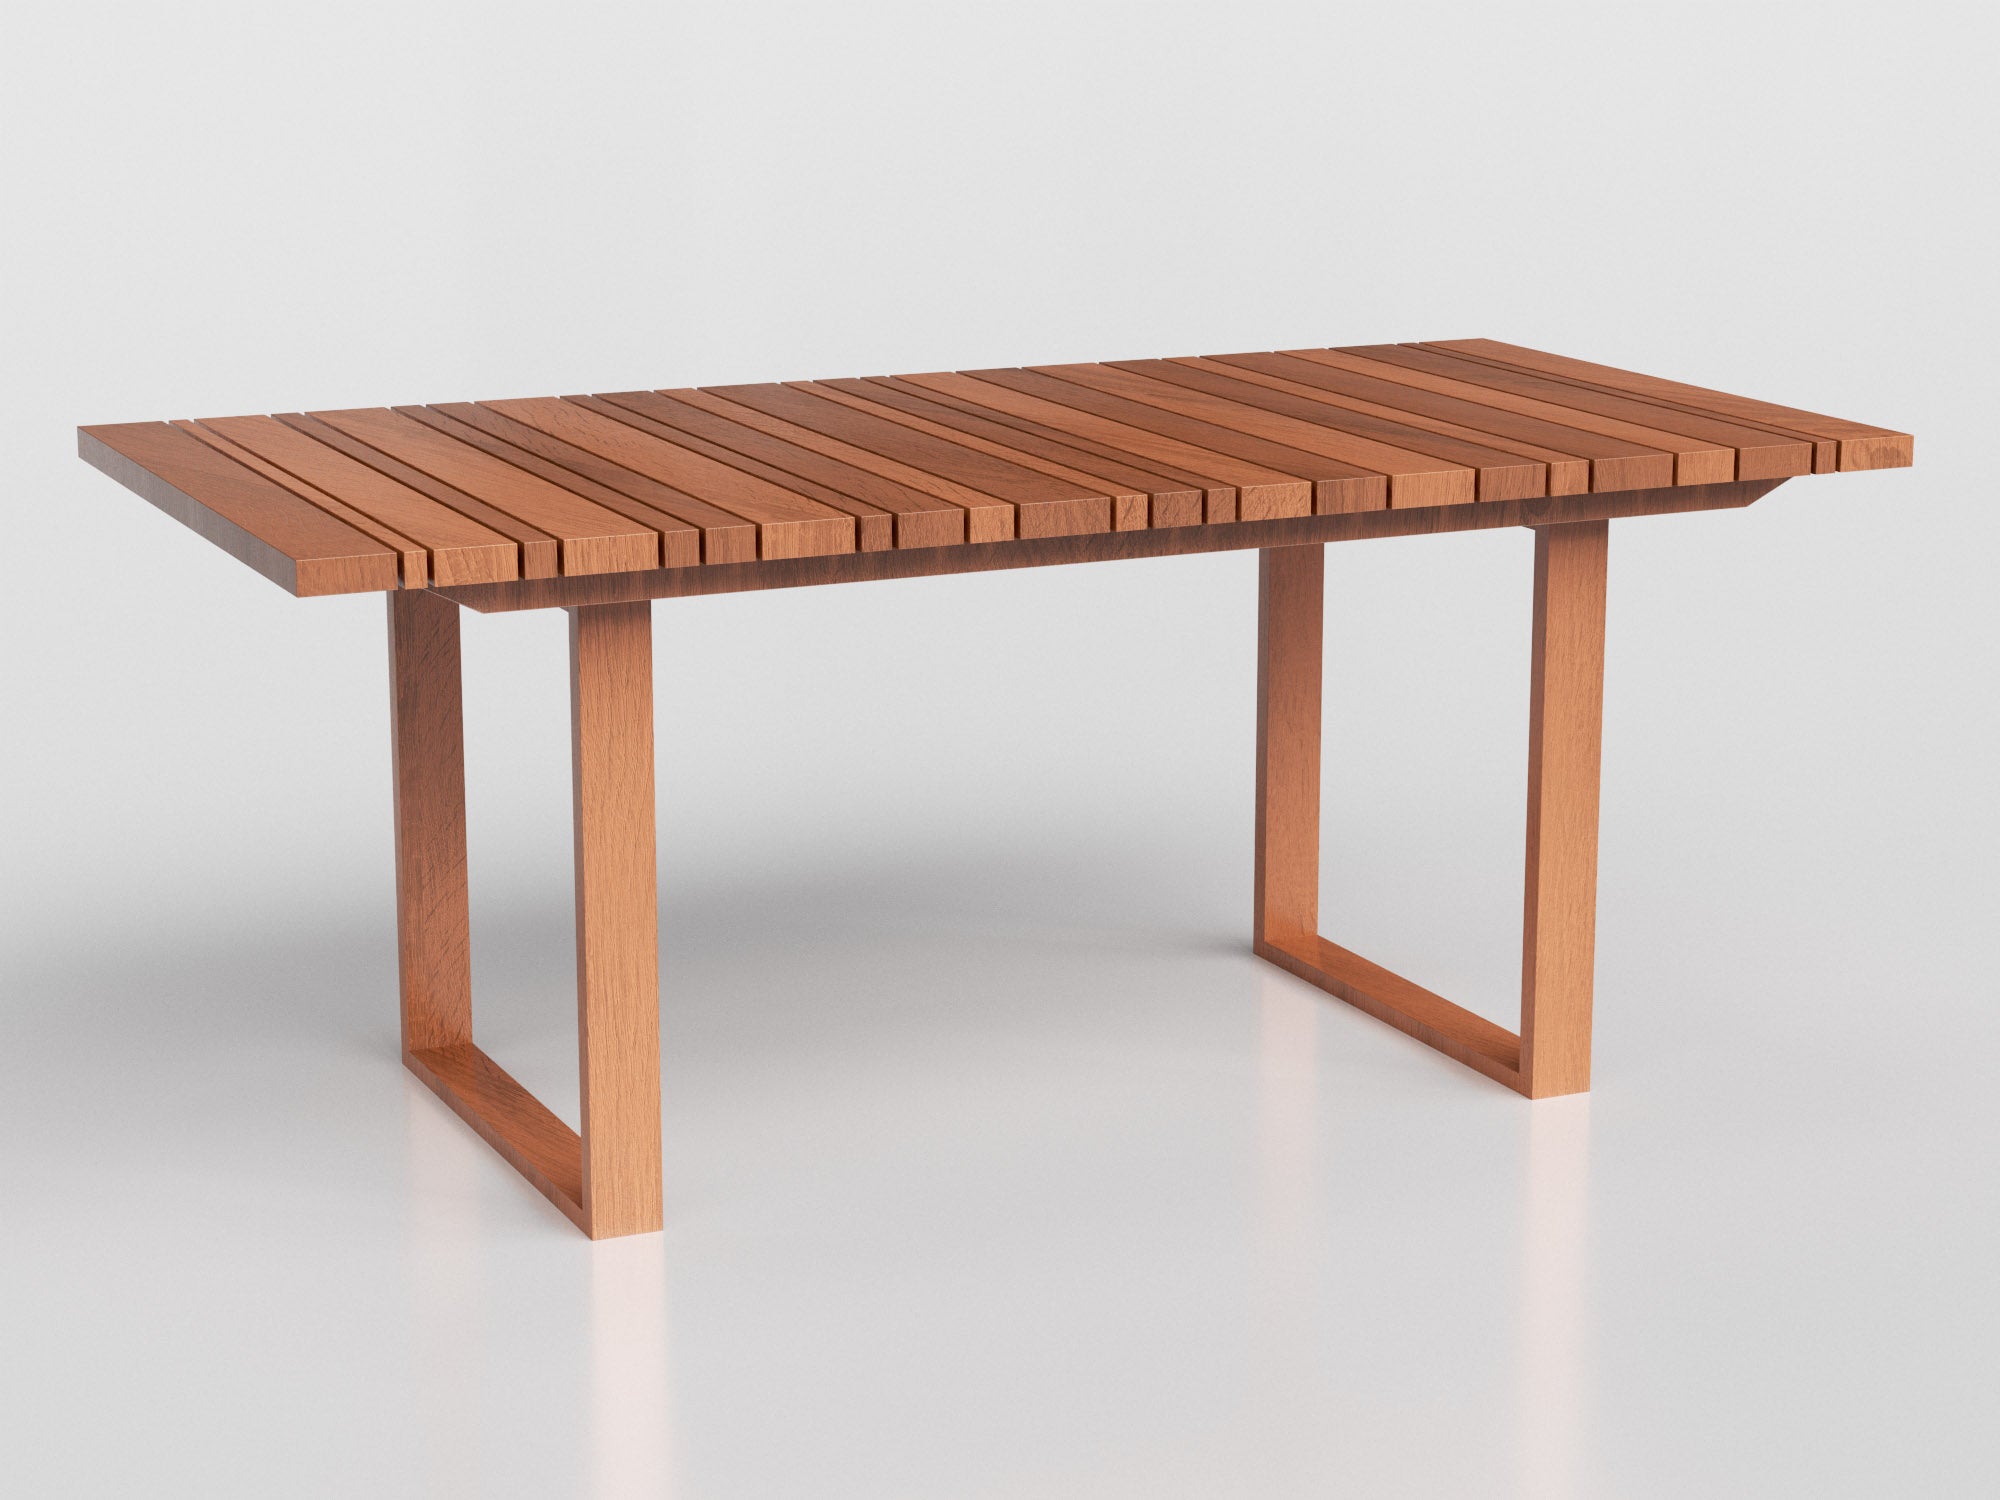 Fusion Dining Table Full with wood estruture and top for outdoor areas, designed by Maria Candida Machado